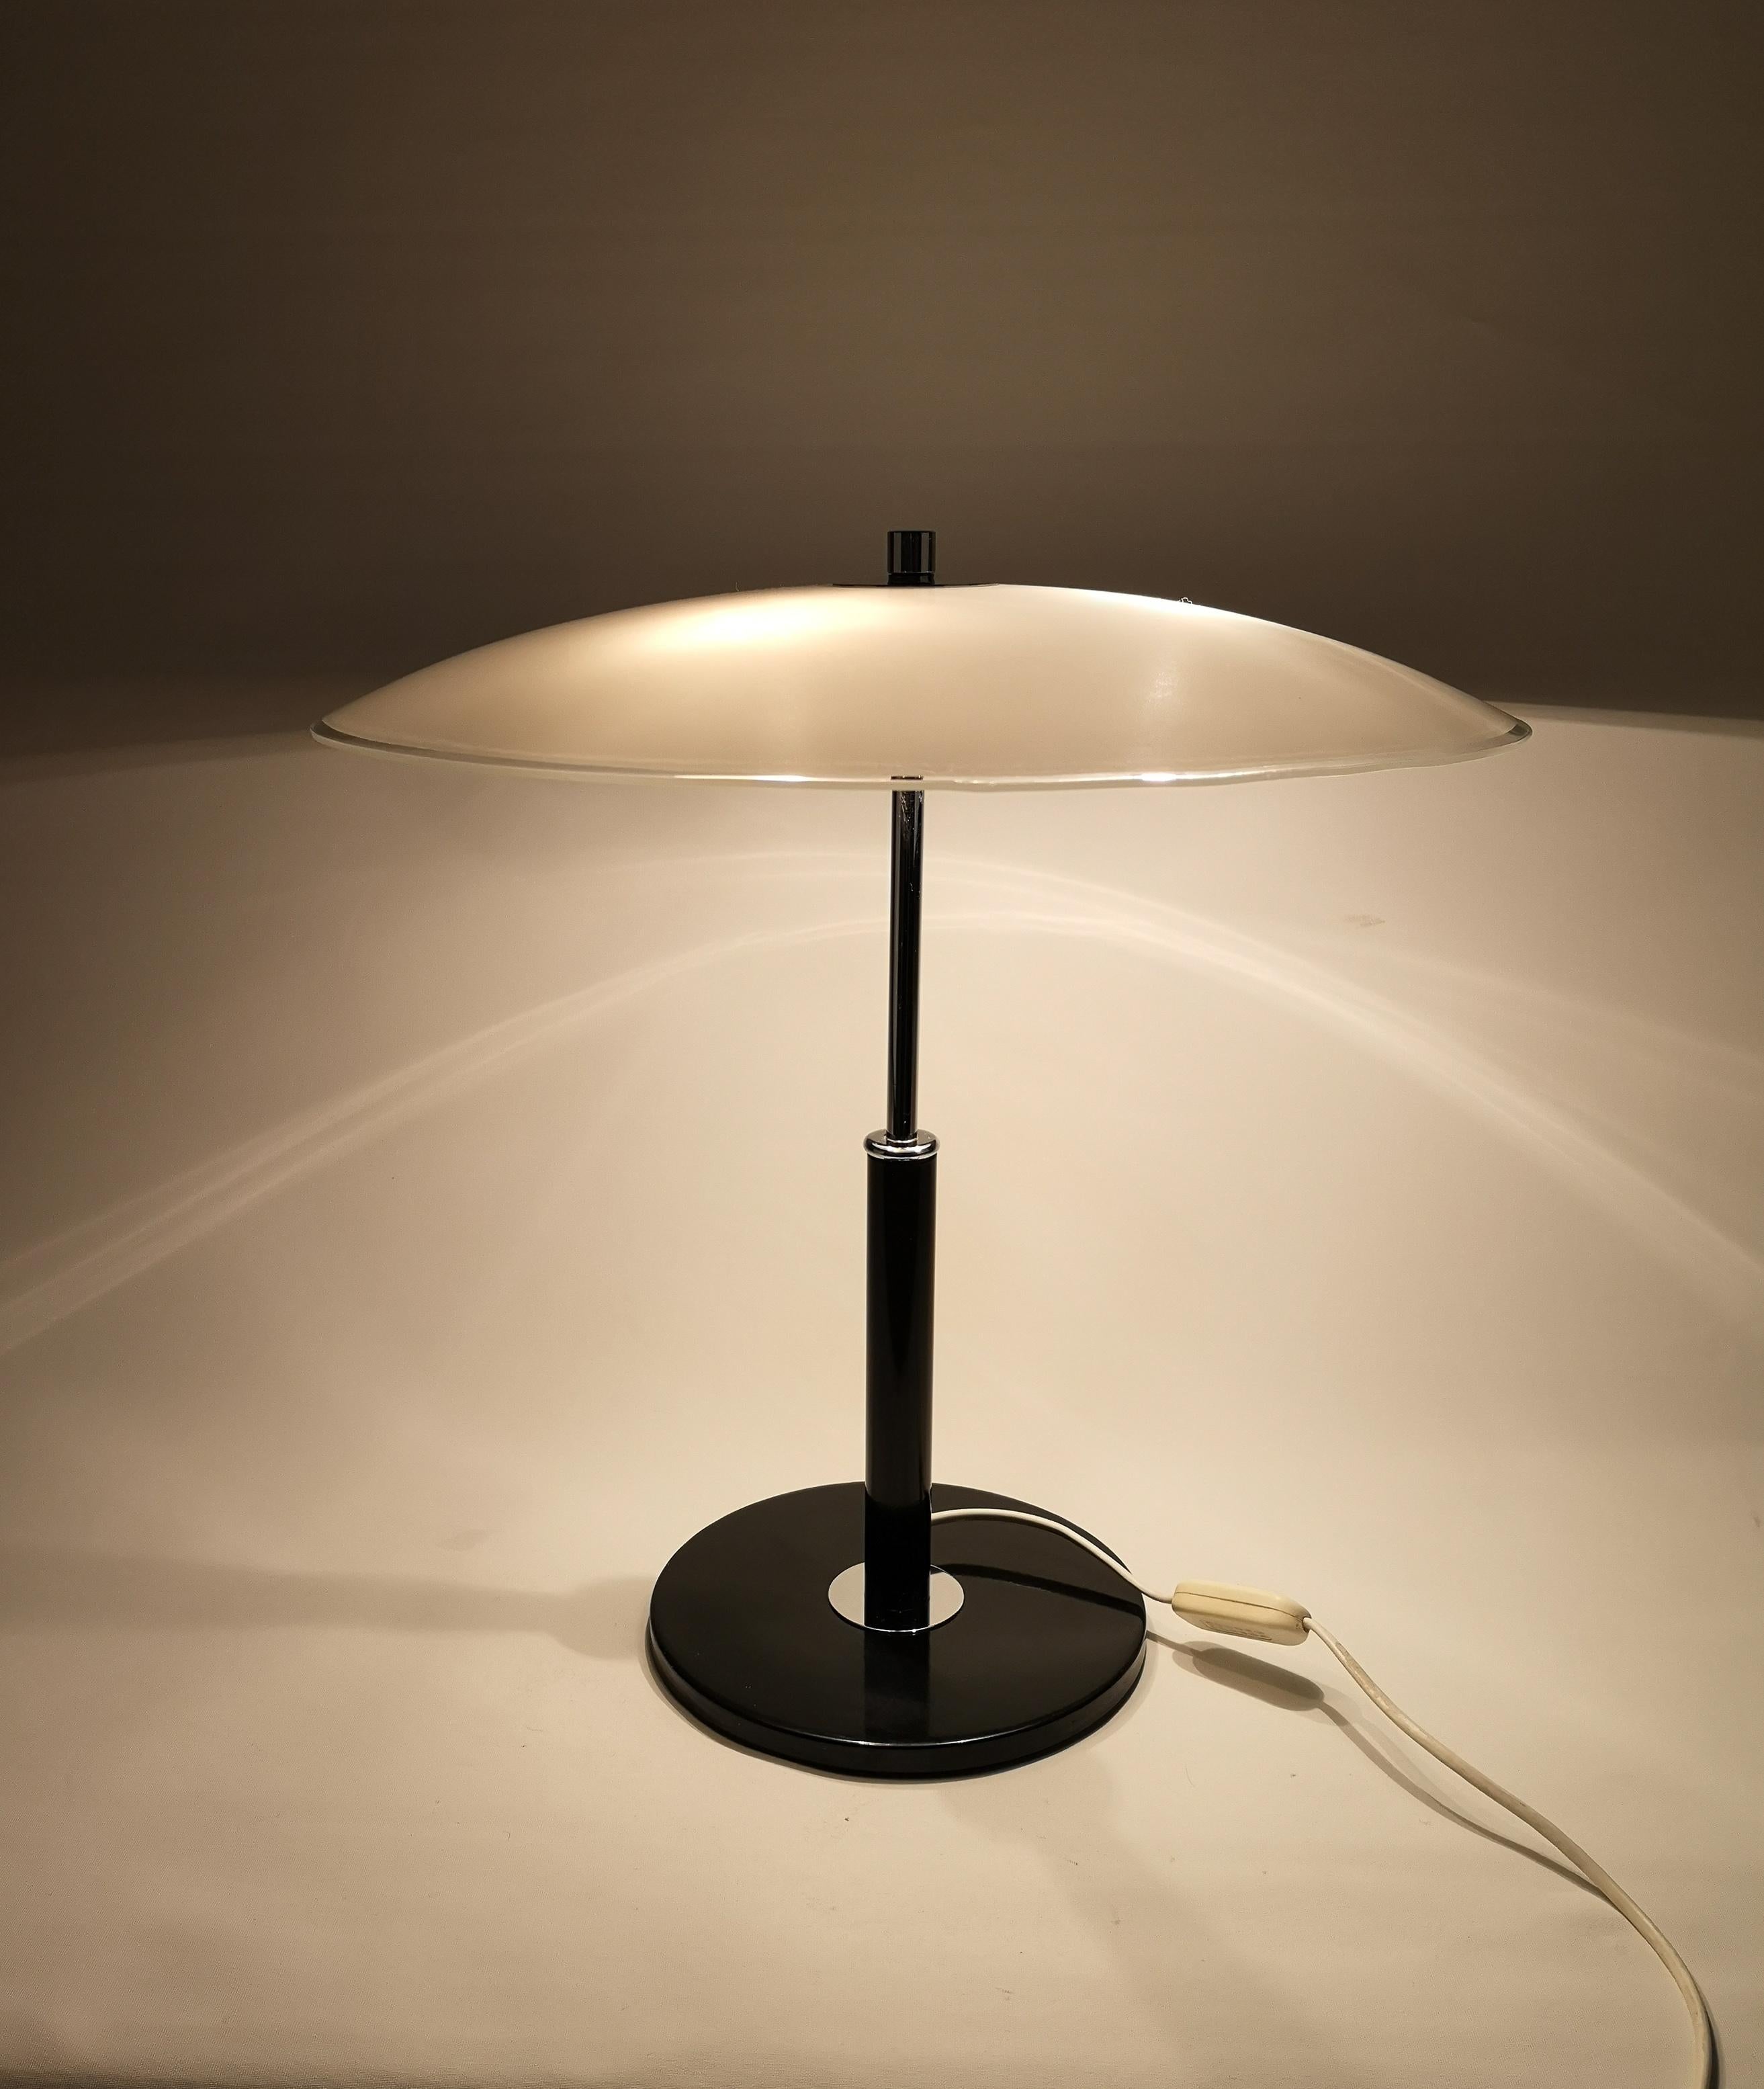 Late 20th Century Art Deco Style Table Lamp Ikea Sweden 1980s